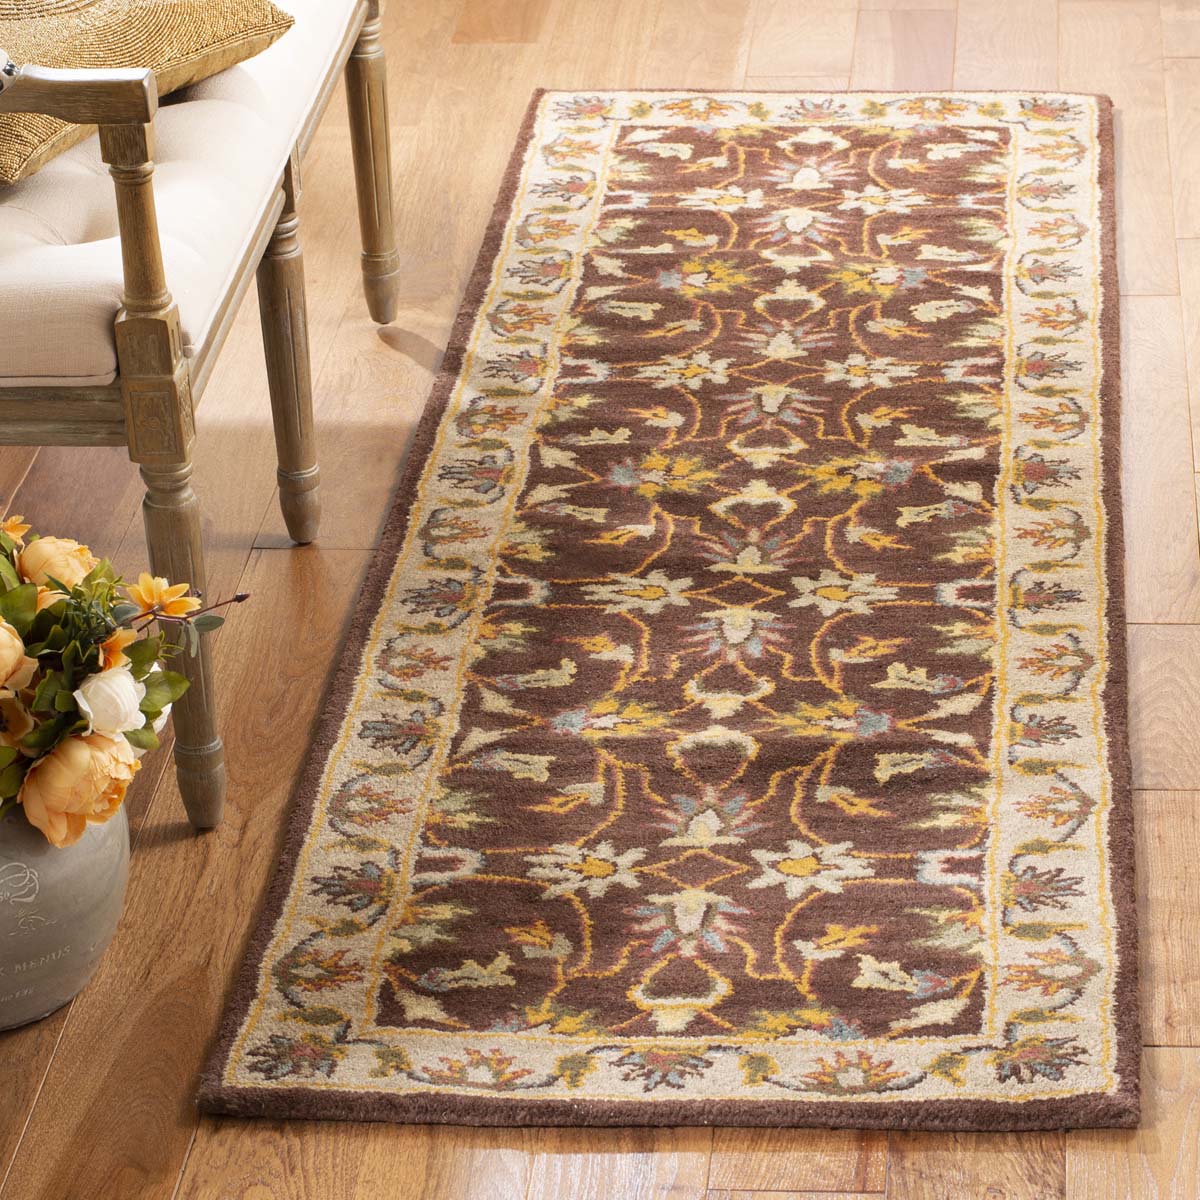 Safavieh Heritage 12A Rug, HG912A - Brown / Ivory